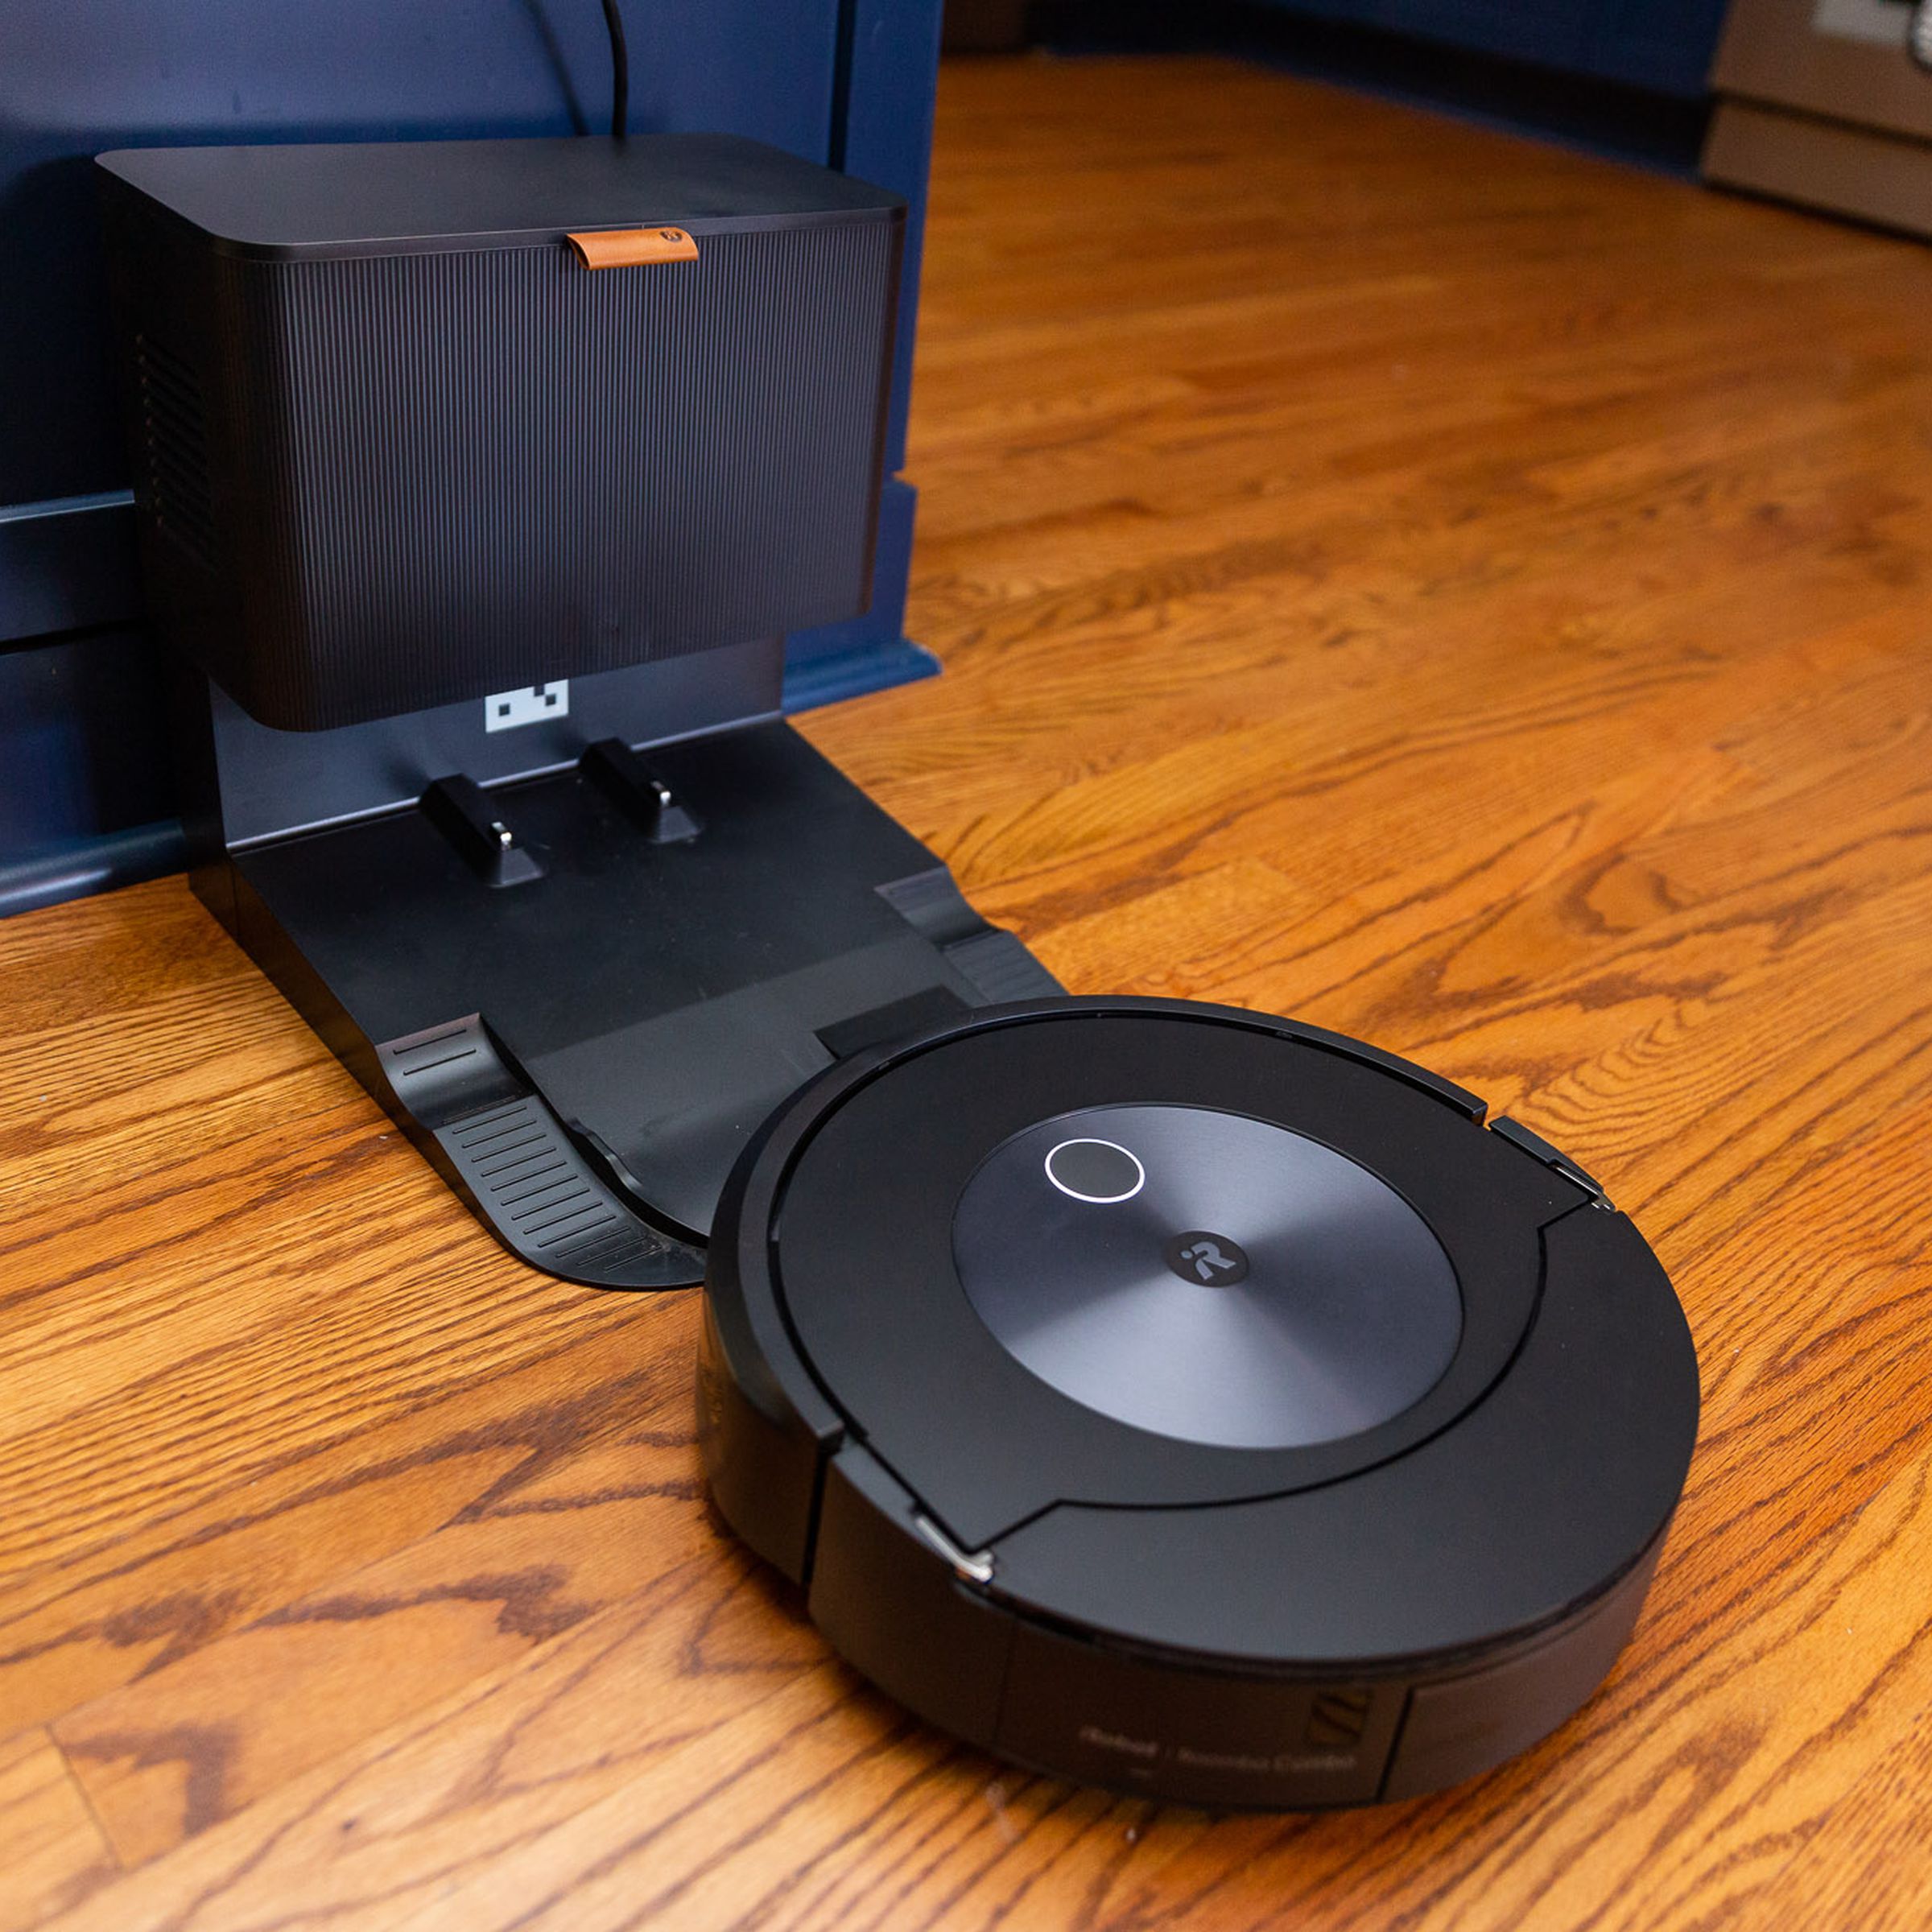 Photo of the Roomba Combo J7 approaching its auto-empty base. The base is about the size of a small kitchen trash can.